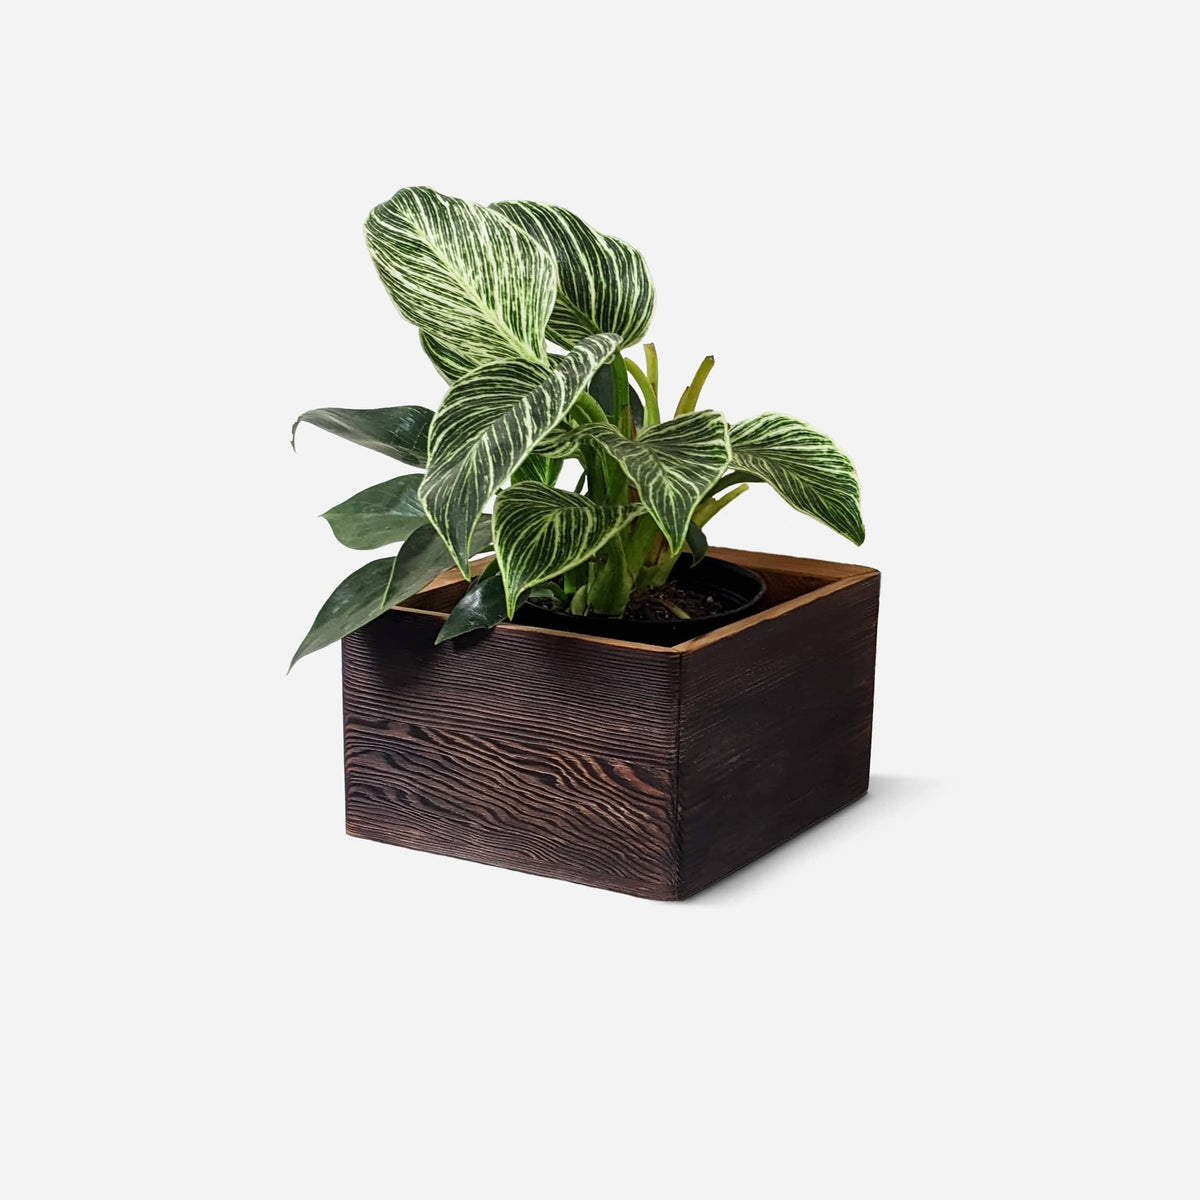 Formr Bling Bling (6&quot; pot) / Brushed brown / One Diamond Self-Watering, Wall-Mounted Planter by Formr